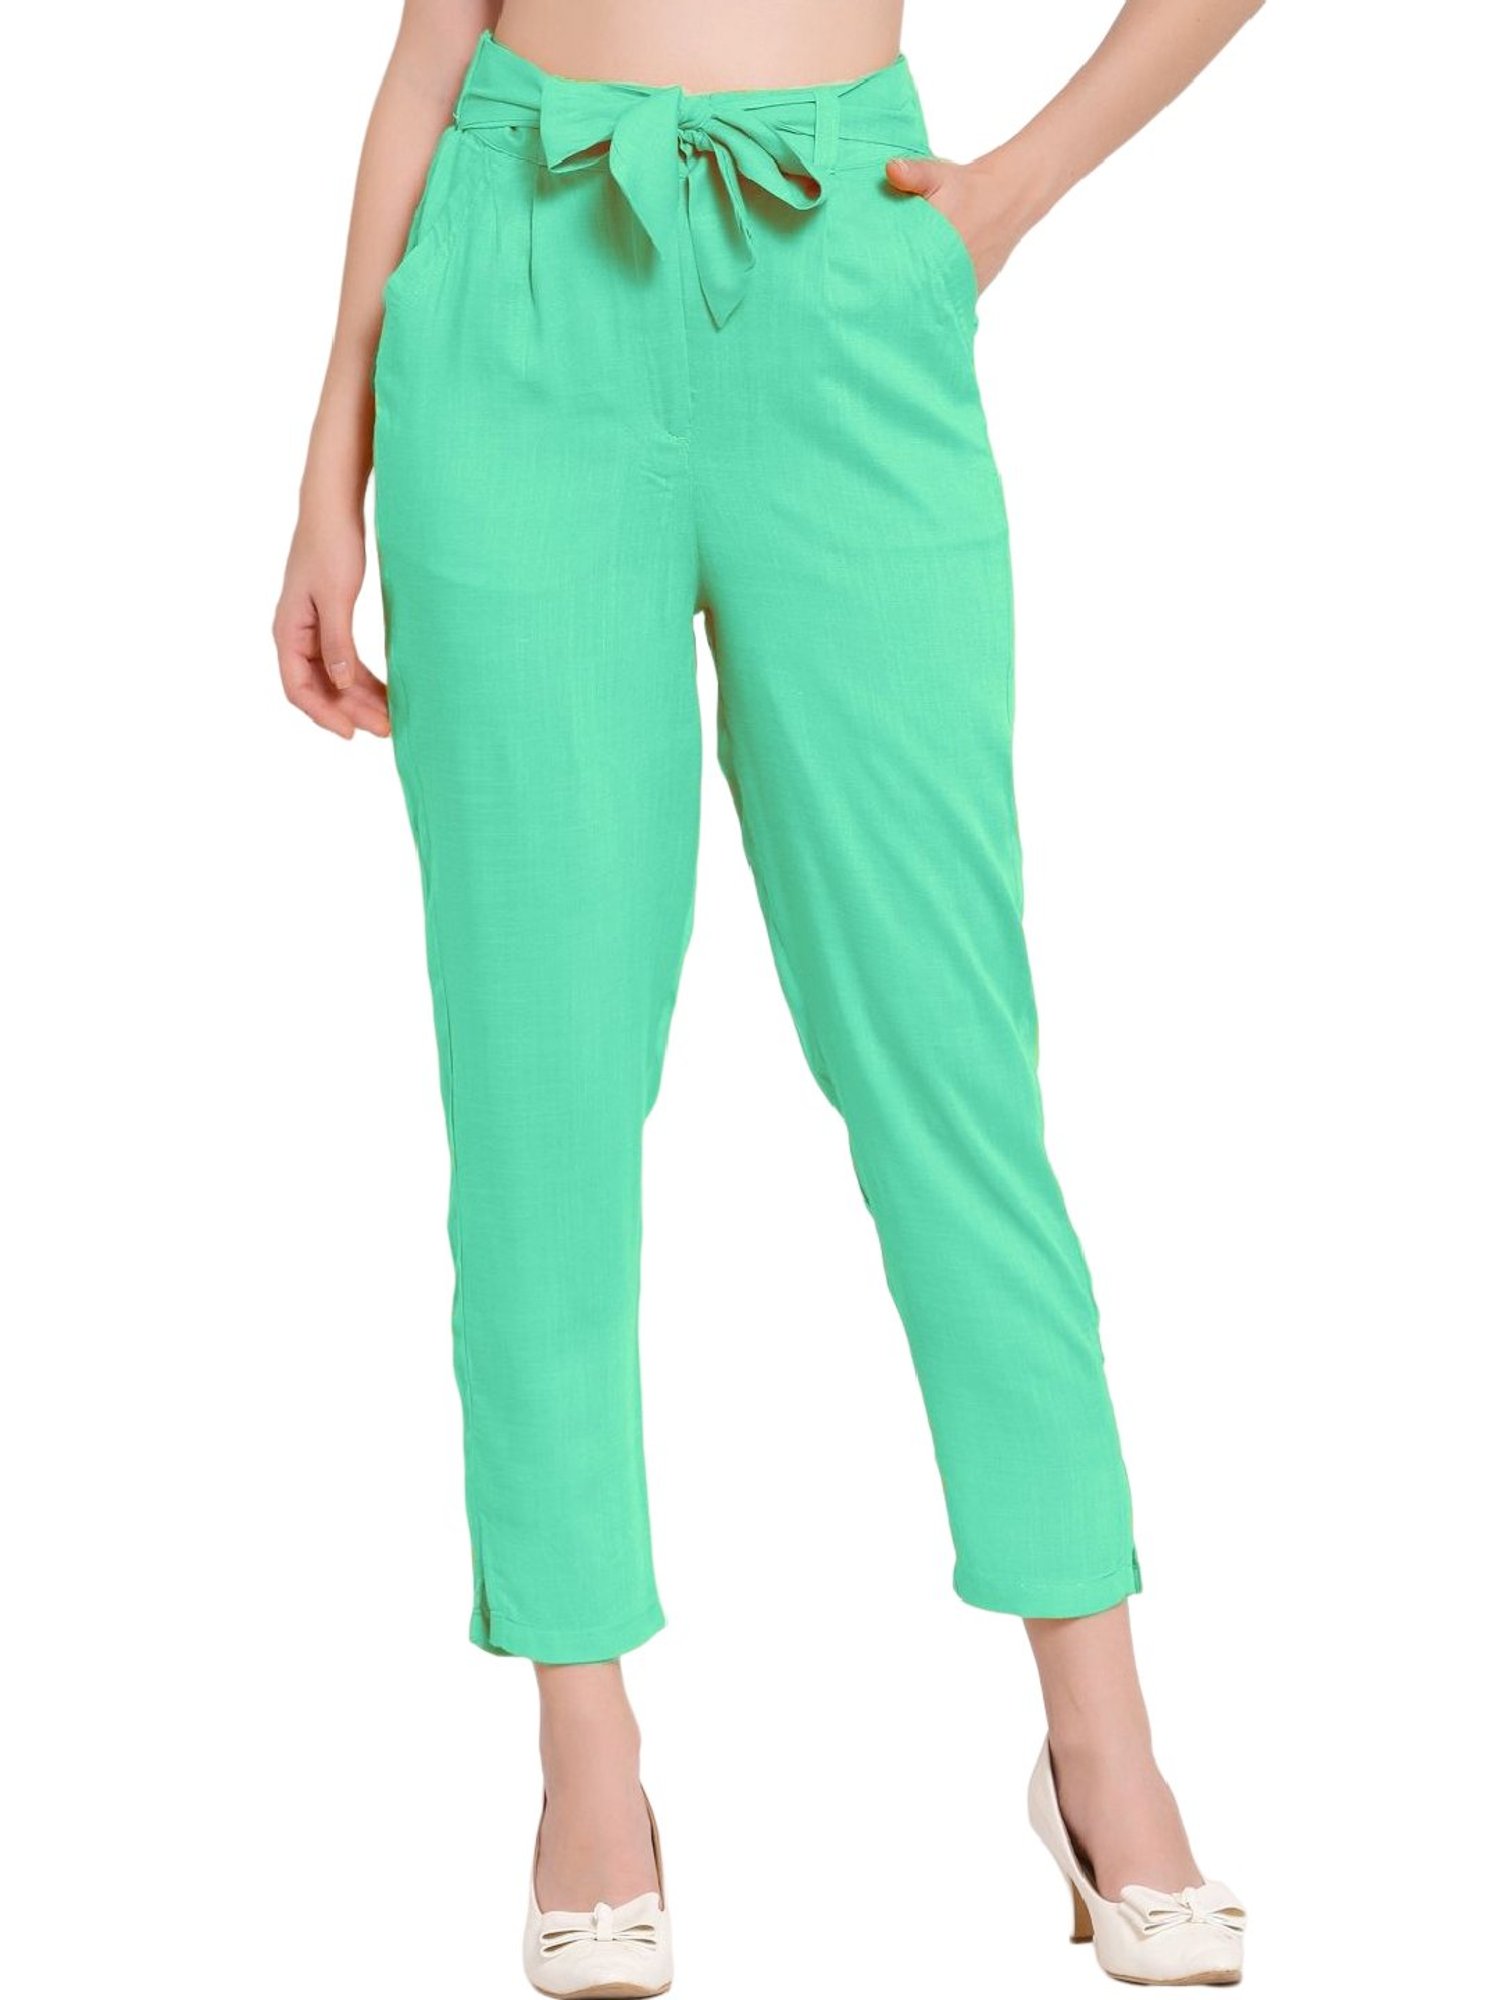 Buy Women Ankle Length Pants Green Solid Taffeta Silk for Best Price  Reviews Free Shipping